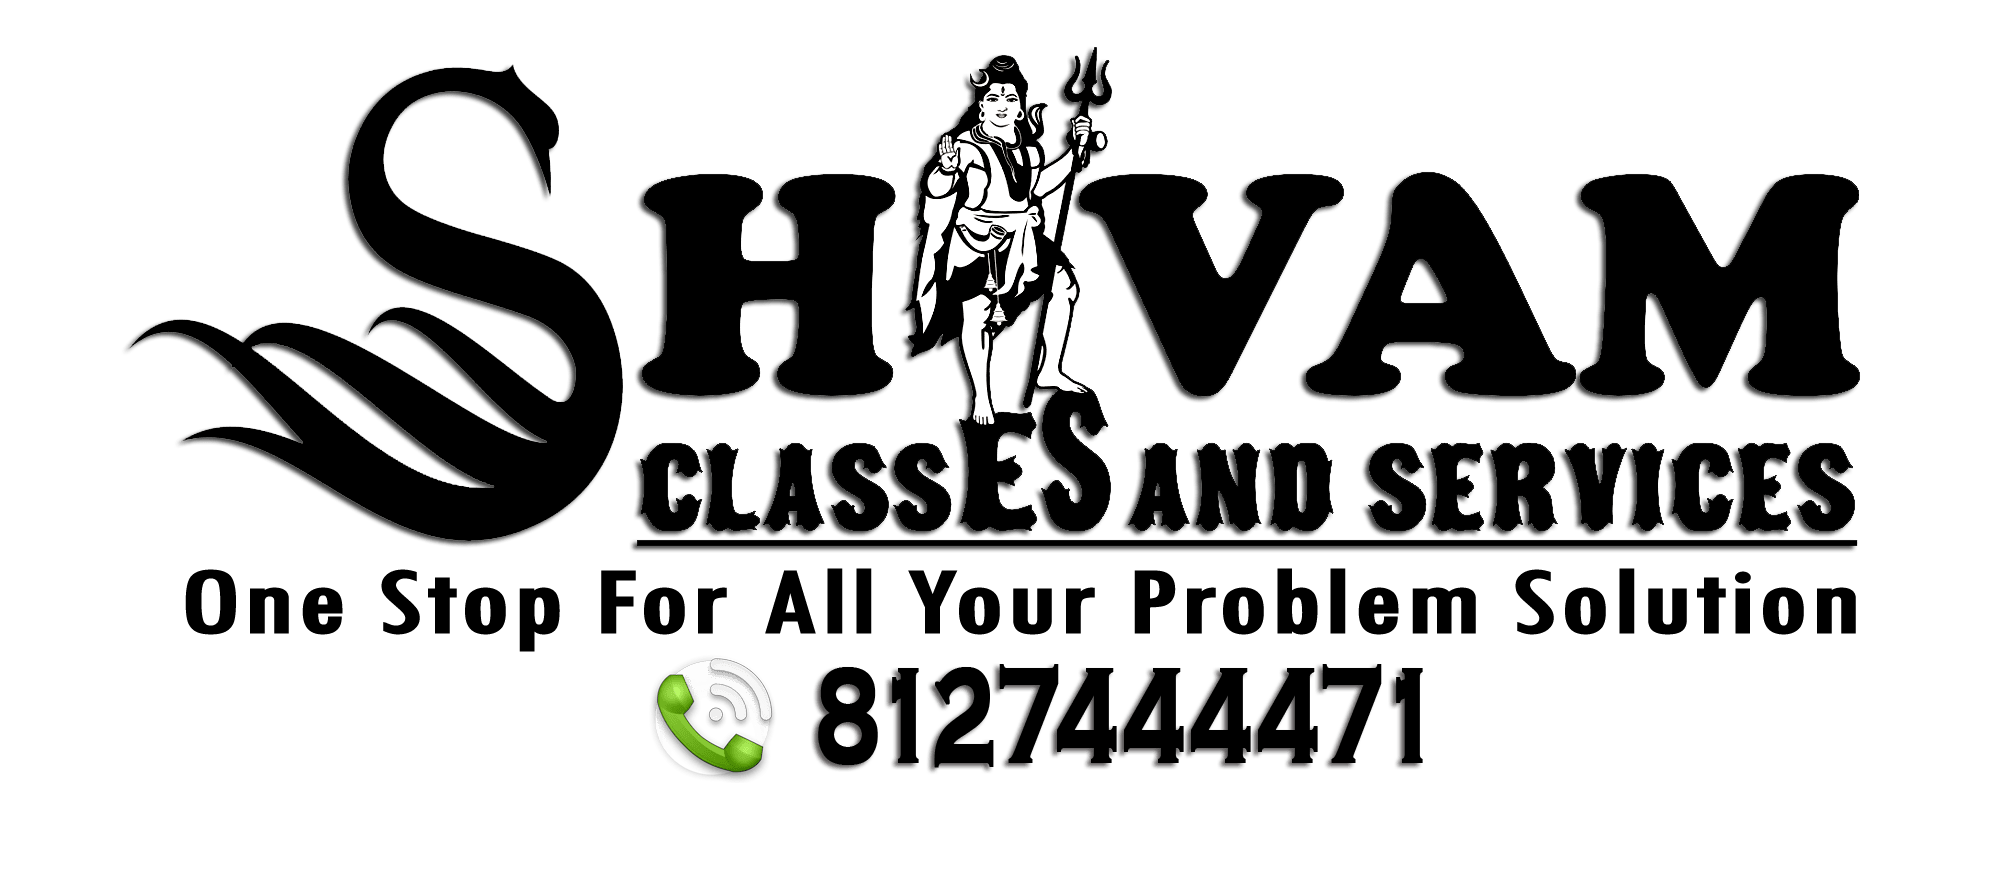 Shivam Classes and Services